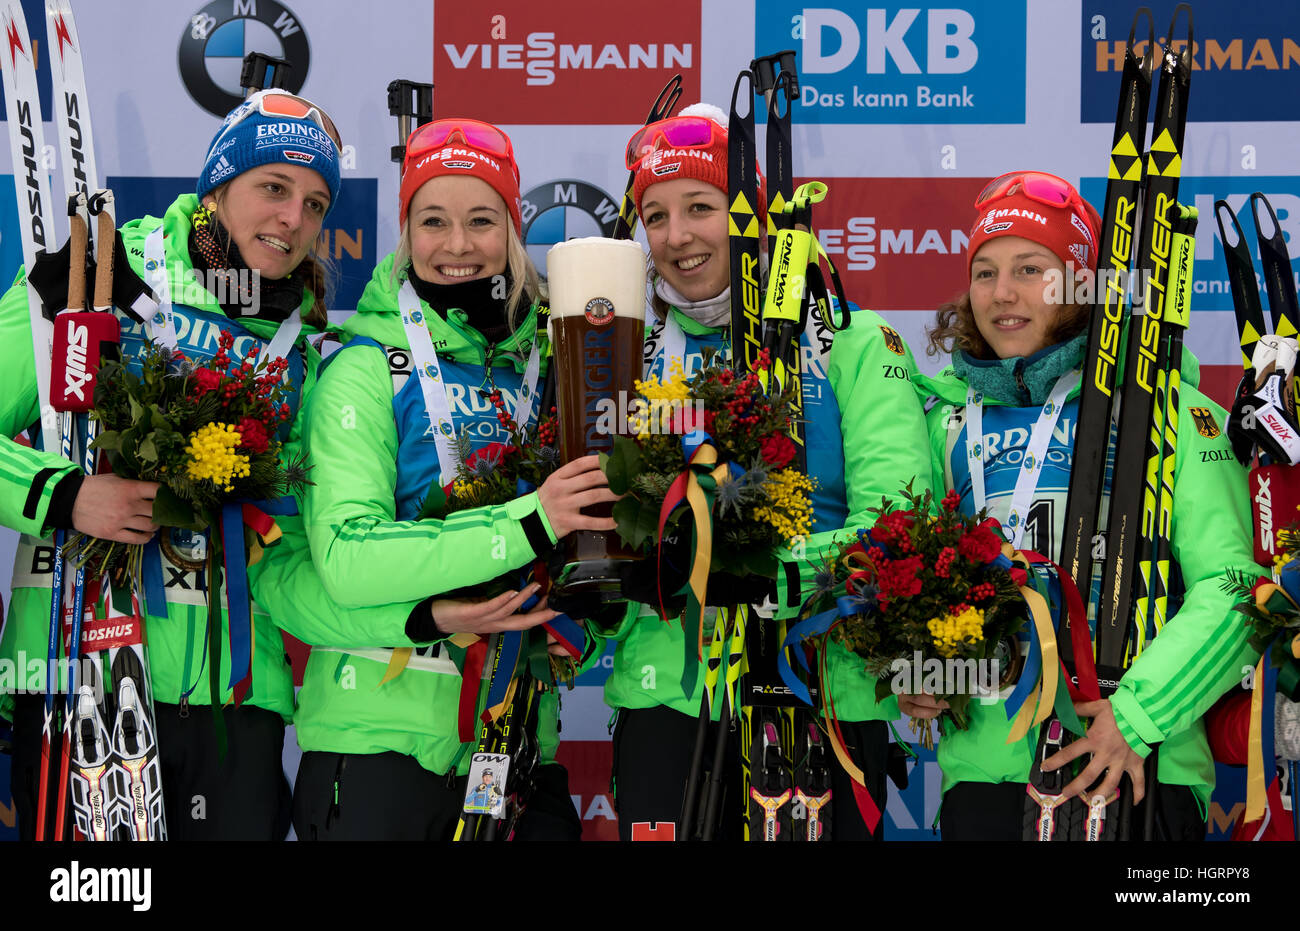 Ruhpolding, Germany. 12th Jan, 2017. L-R: German biathletes Vanessa Hinz, Maren Hammerschmidt, Franziska Preuss and Laura Dahlmeier on the victor's podium after taking first place in the 4 x 6 kilometer women's relay race at the Biathlon World Cup in the Chiemgau Arena in Ruhpolding, Germany, 12 January 2017. Germany finished in first place ahead of France and Norway. Photo: Matthias Balk/dpa/Alamy Live News Stock Photo